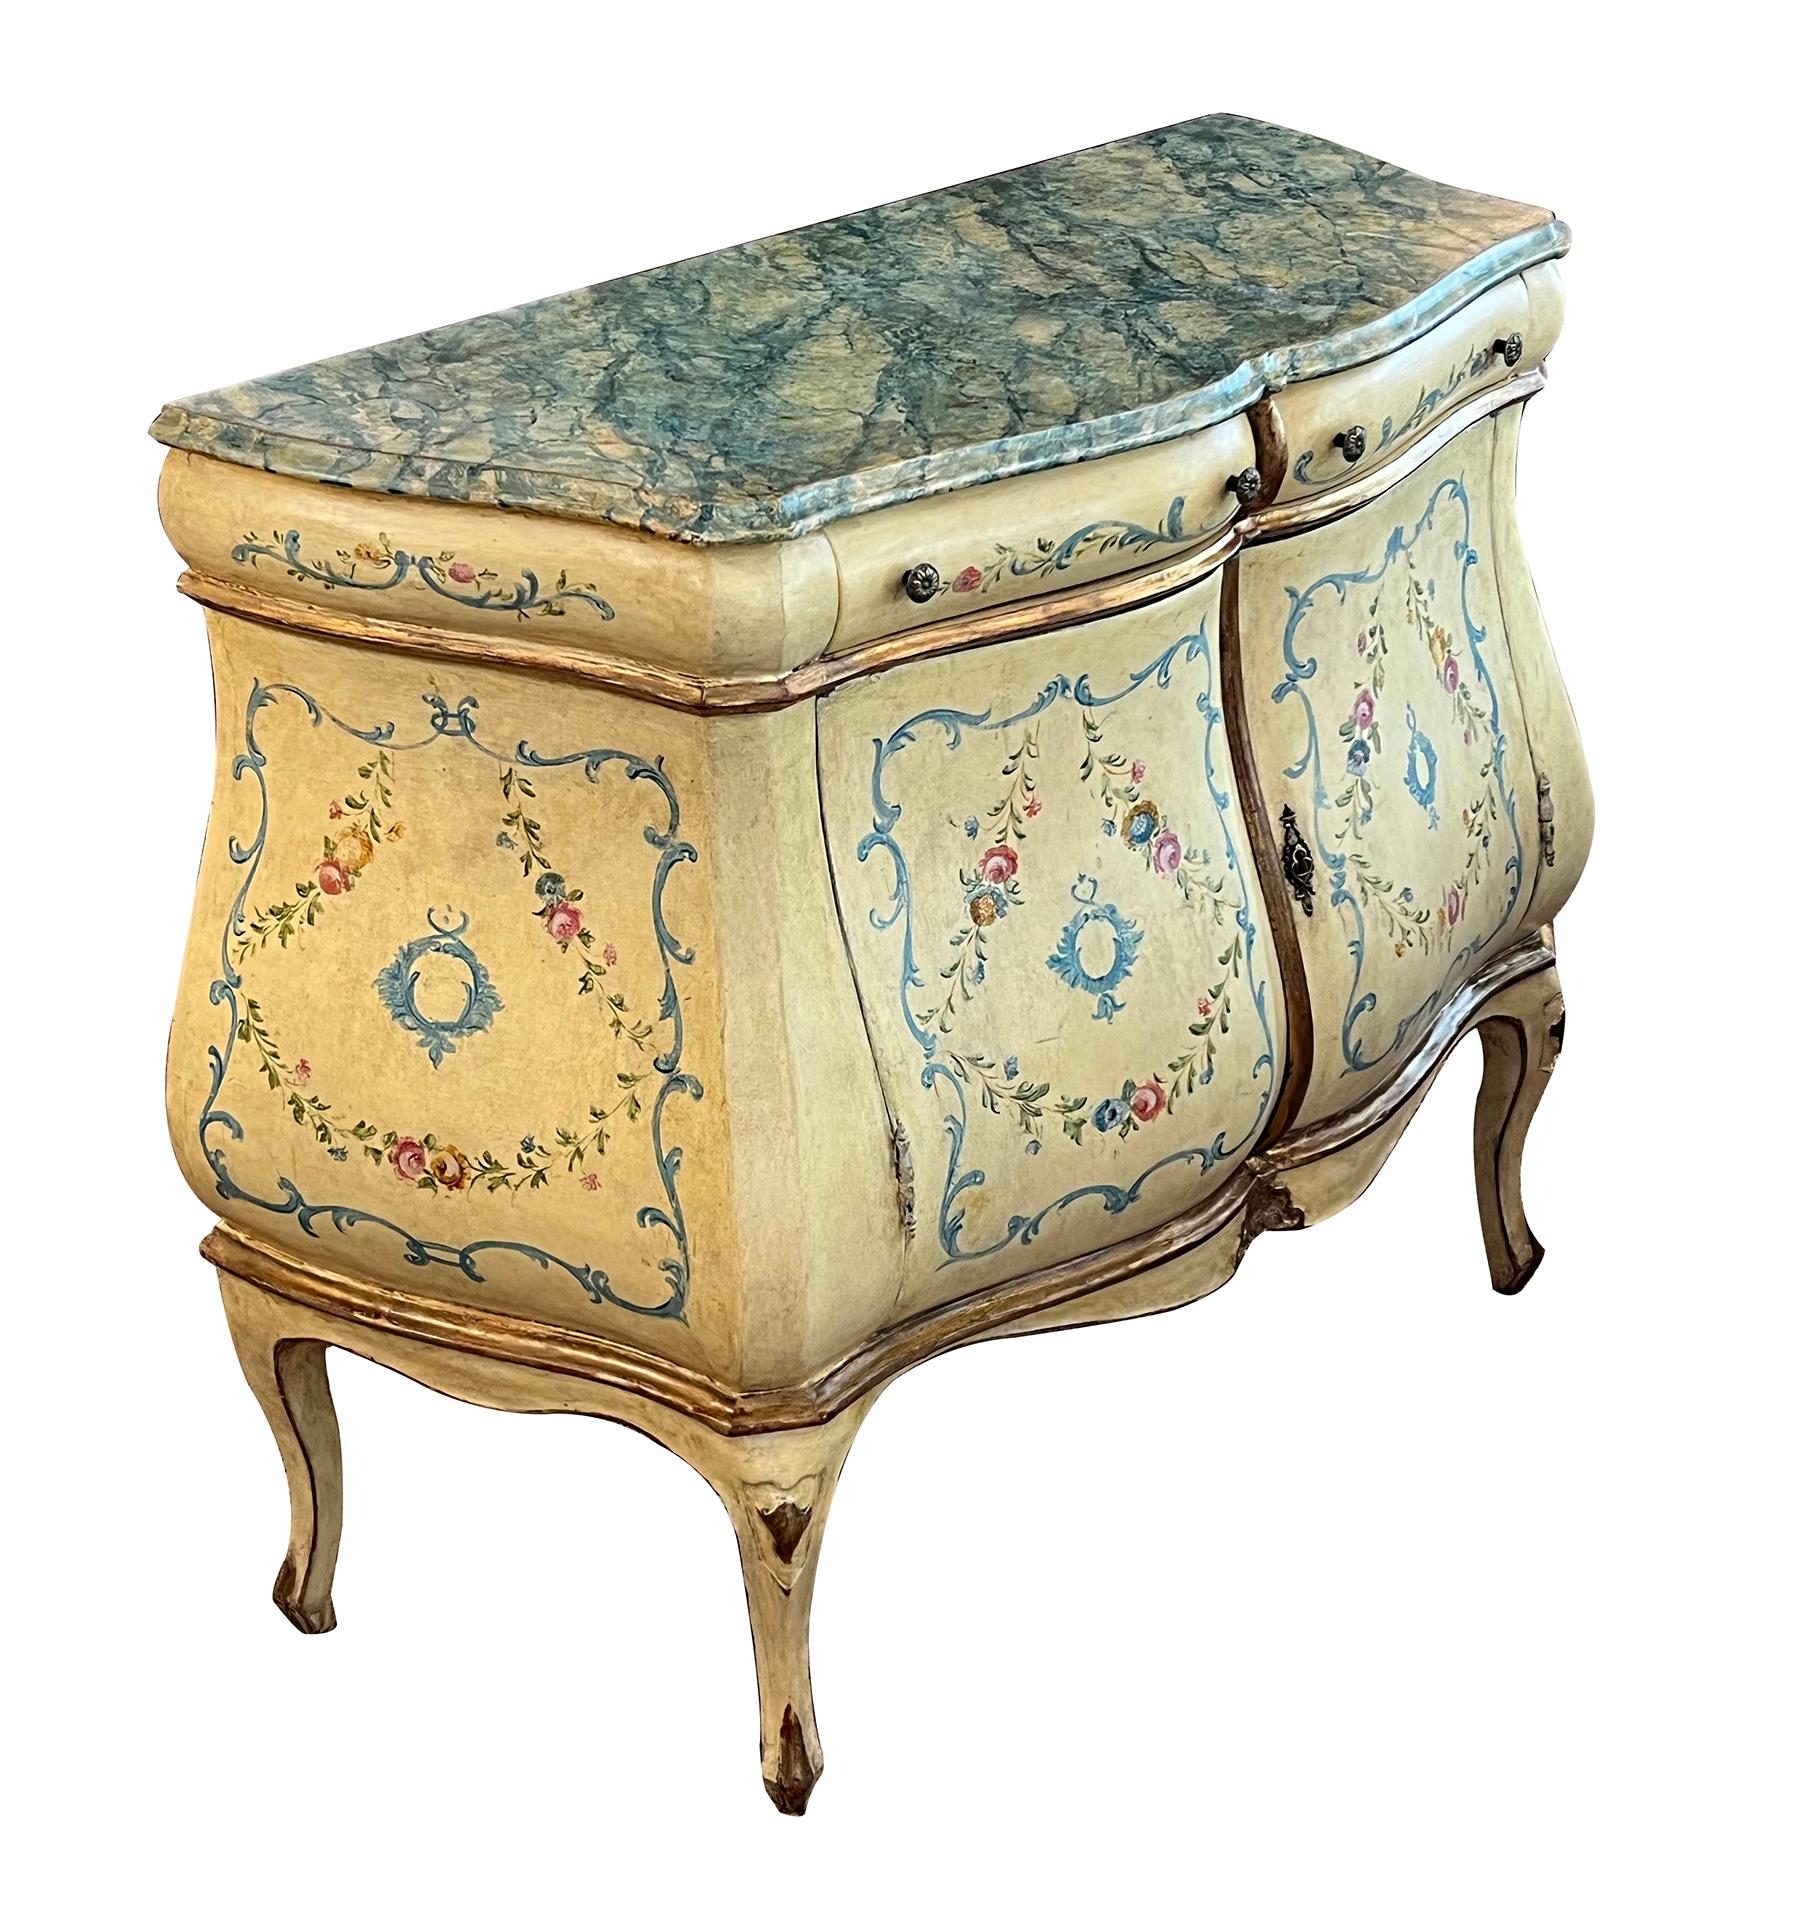 the shaped faux marble top above a bombe-form case fitted with 2 drawers over 2 doors all raised on cabriole legs; the whole painted with foliate vines and floral garlands on a muted butter-yellow ground.